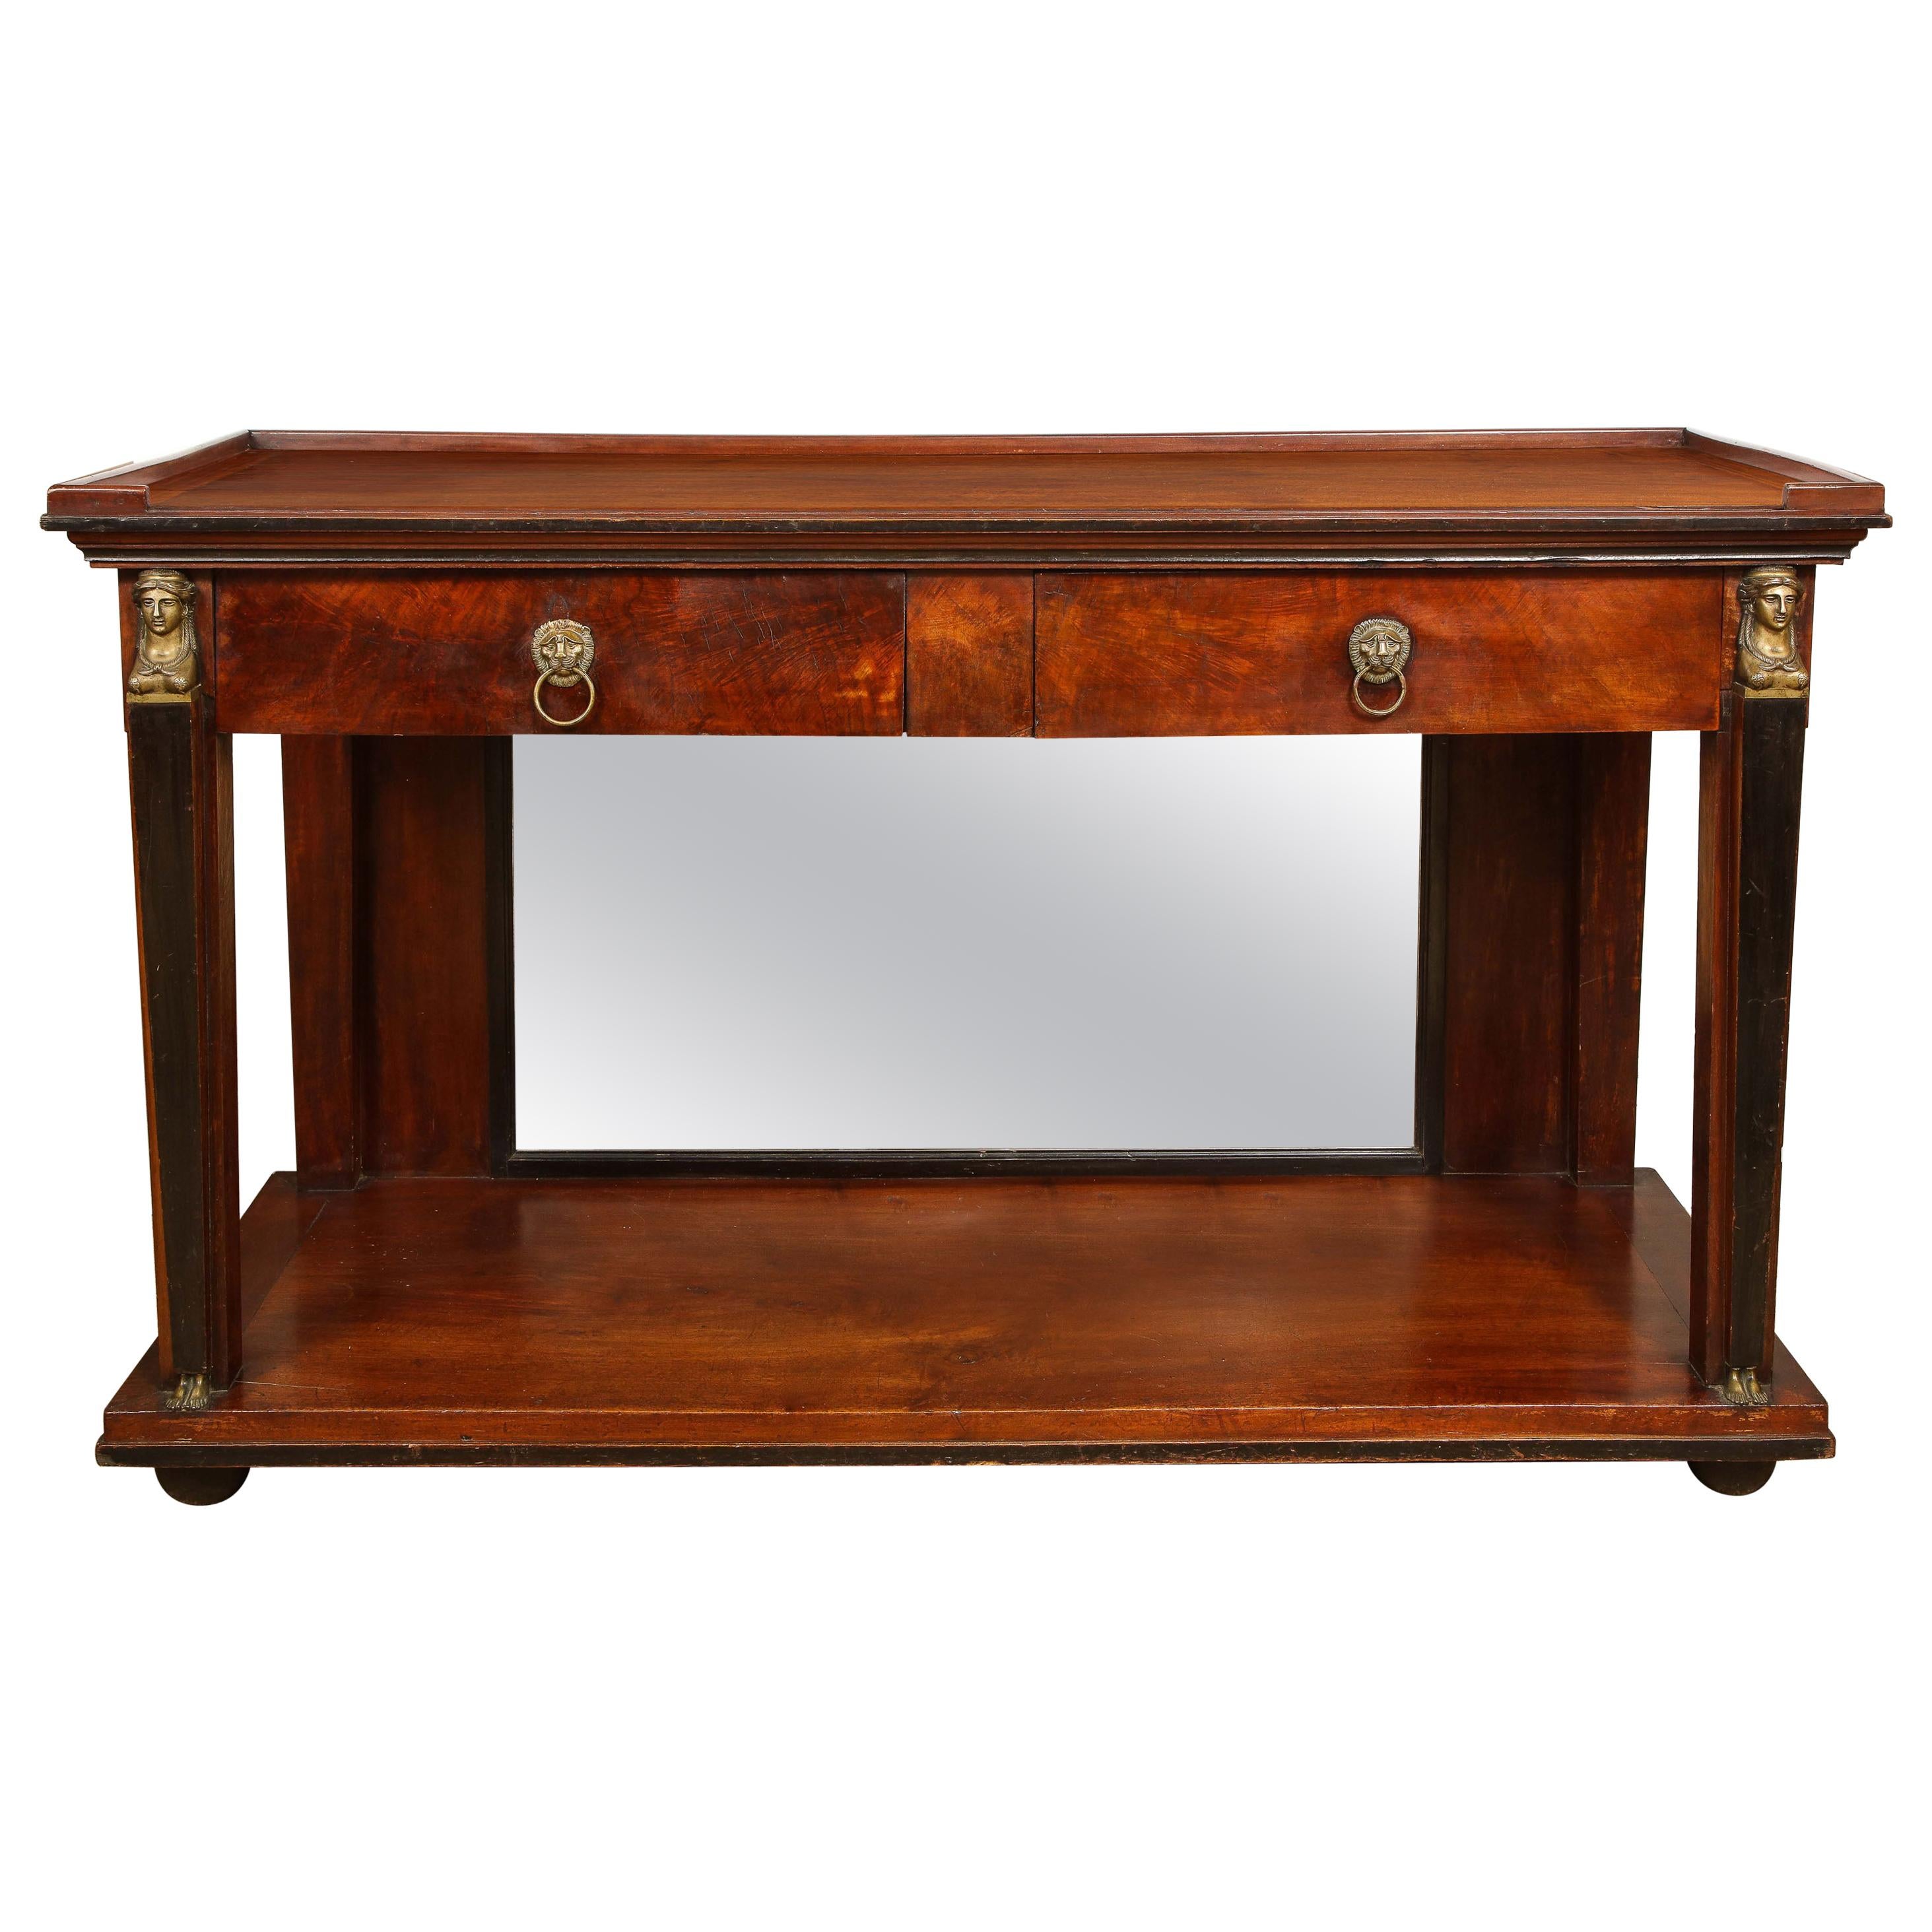 show original title Details about   Table Console Baroque drawer Console Wood Inlaid Wood Wall Table Console Table 